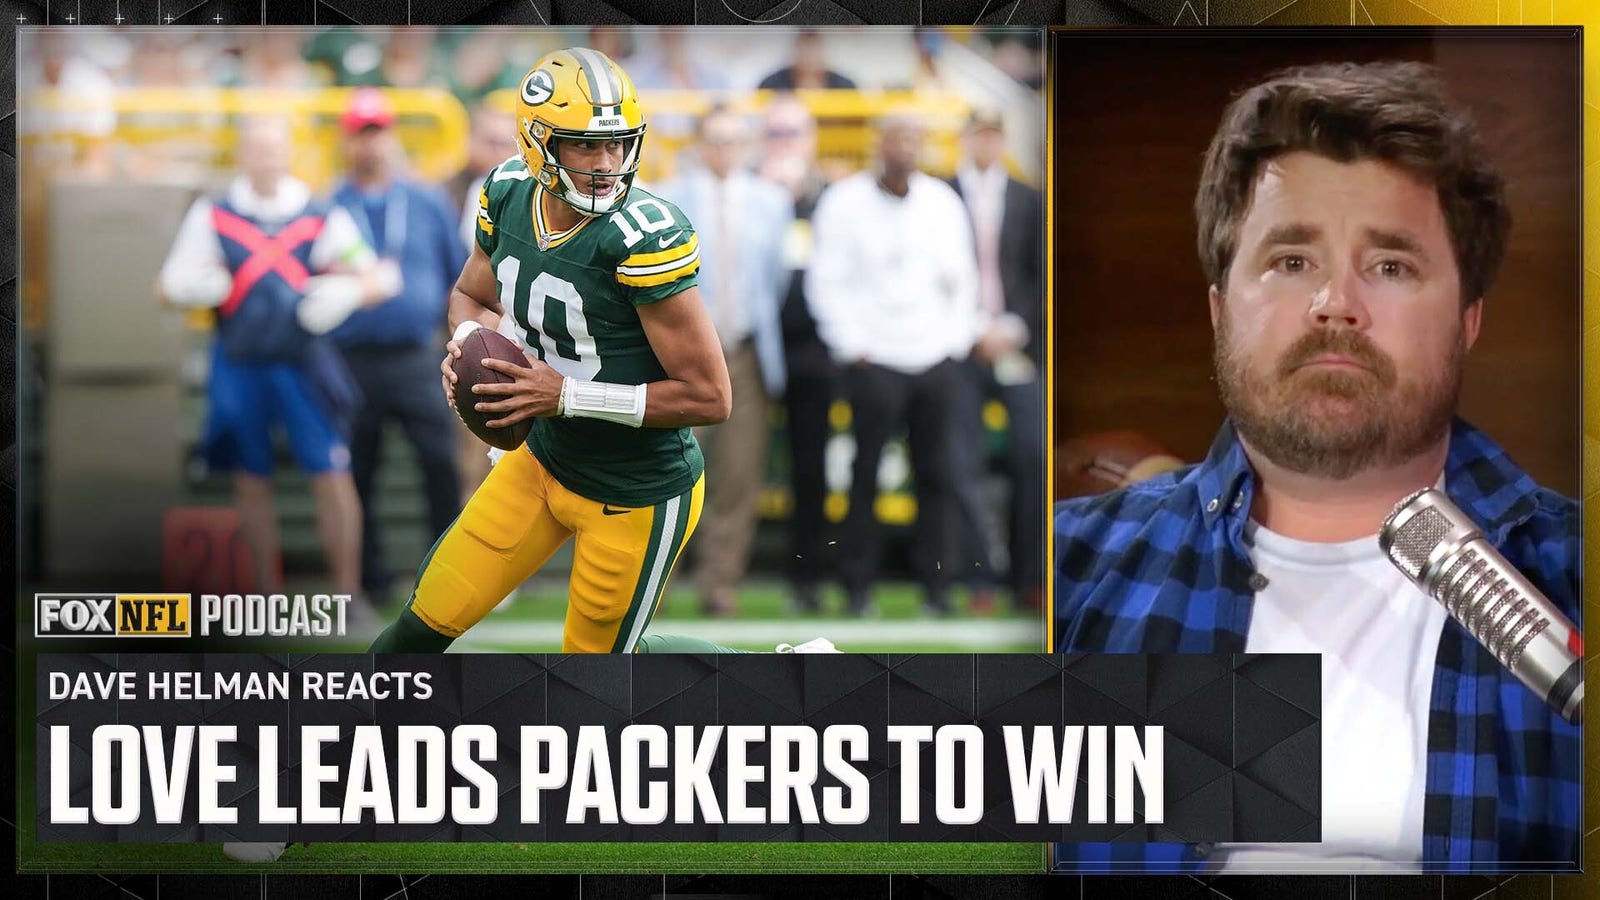 Dave Helman reacts to Jordan Love, Packers' comeback